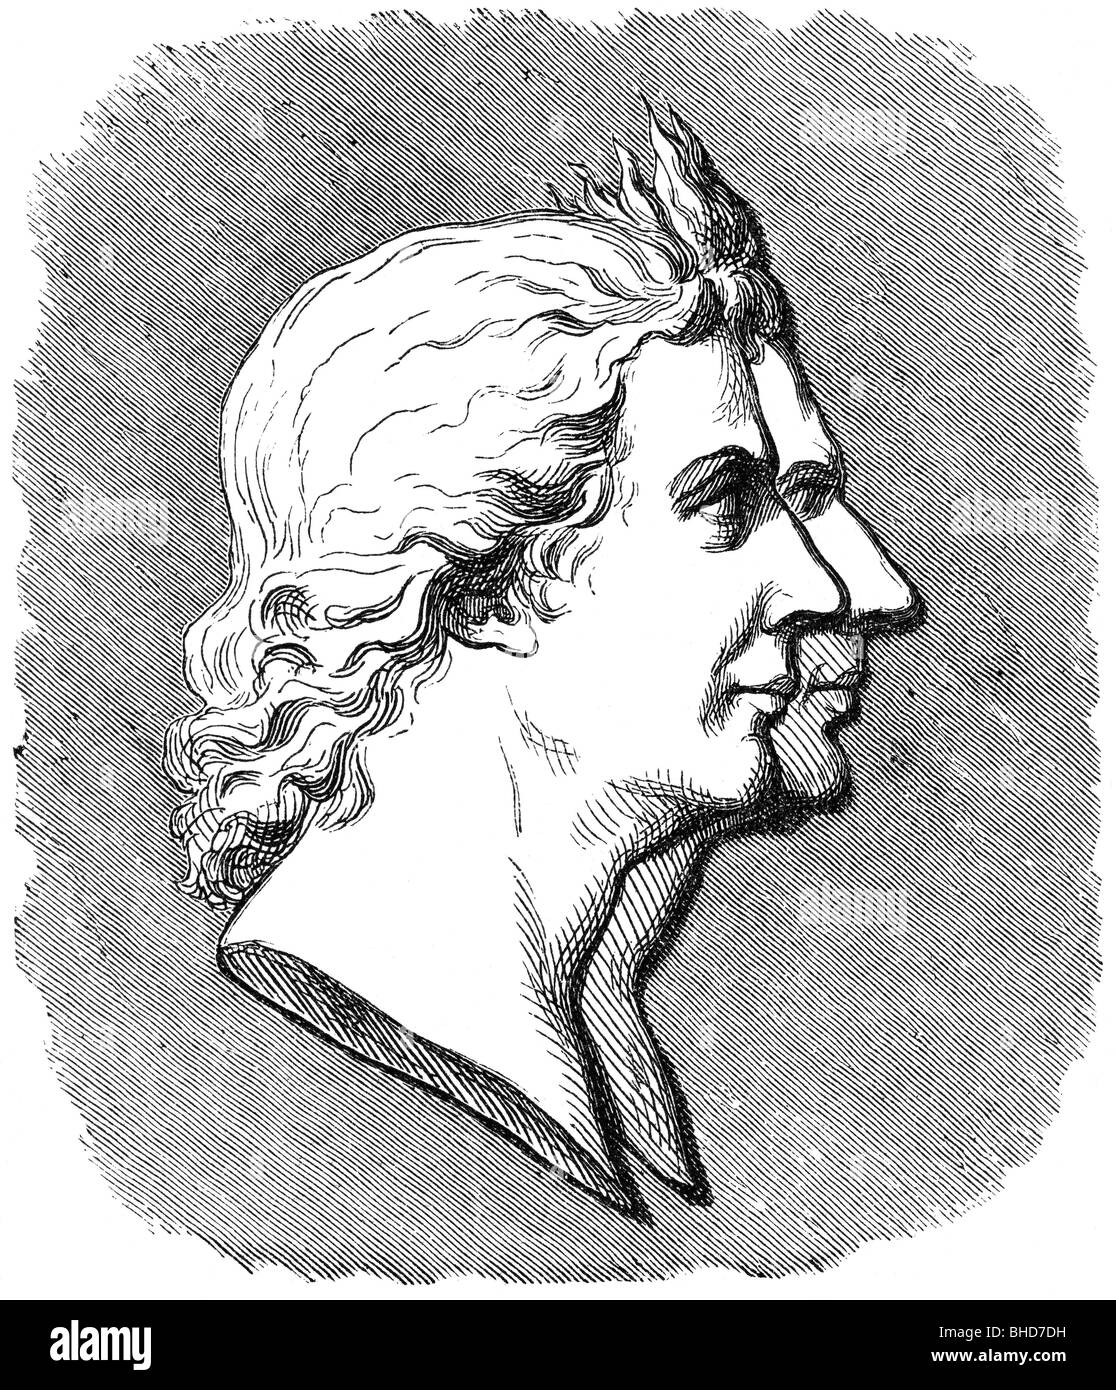 Montgolfier, Joseph Michel (26.8.1740 - 26.6.1810) and Jacques Etienne (6.1.1745 - 2.8.1799), French inventors, portraits, wood engraving, 19th century, , Stock Photo